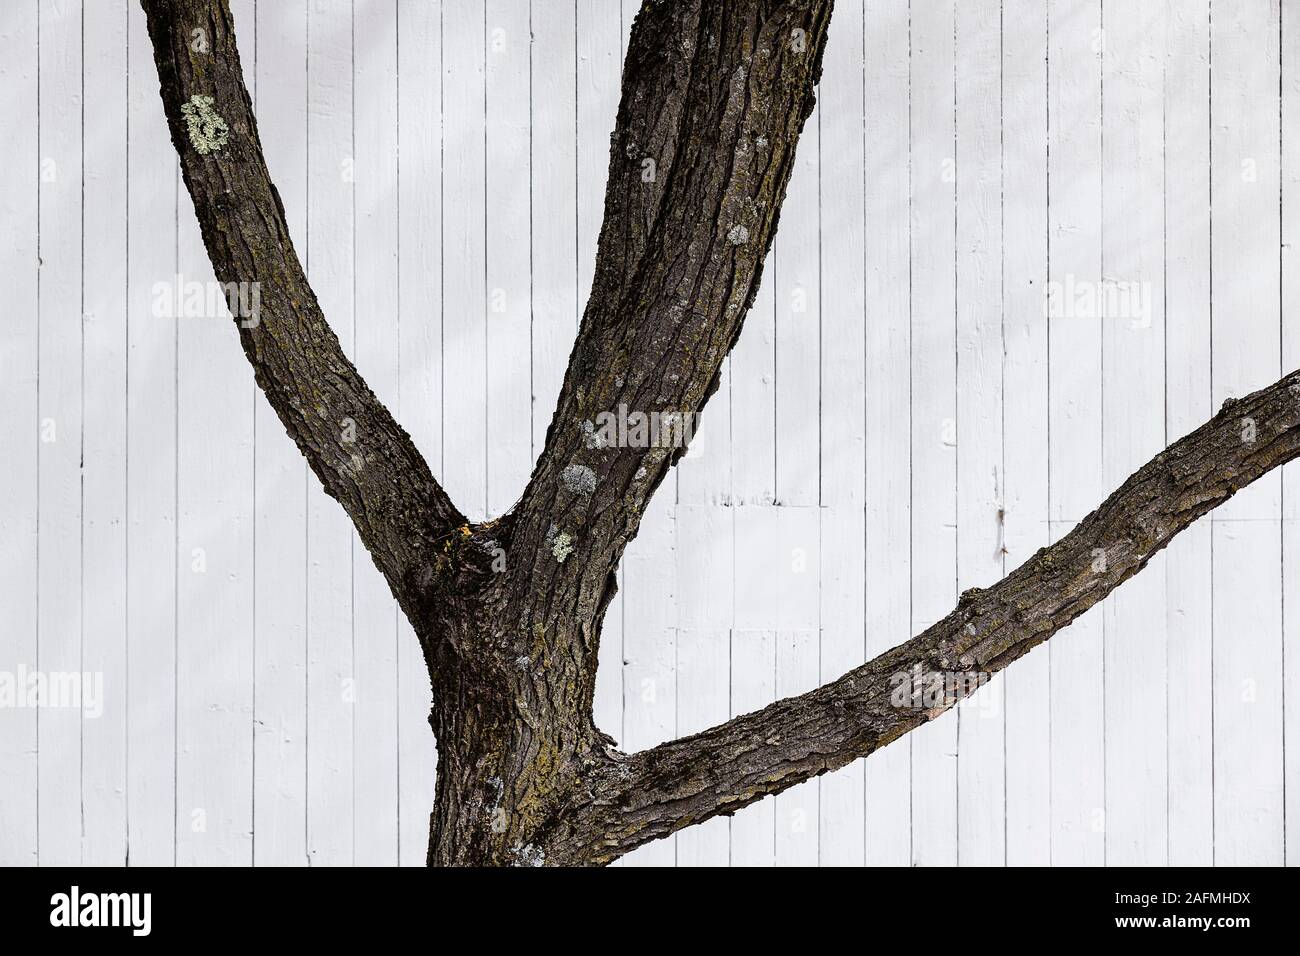 Tree trunk and branches against a white barn. Stock Photo